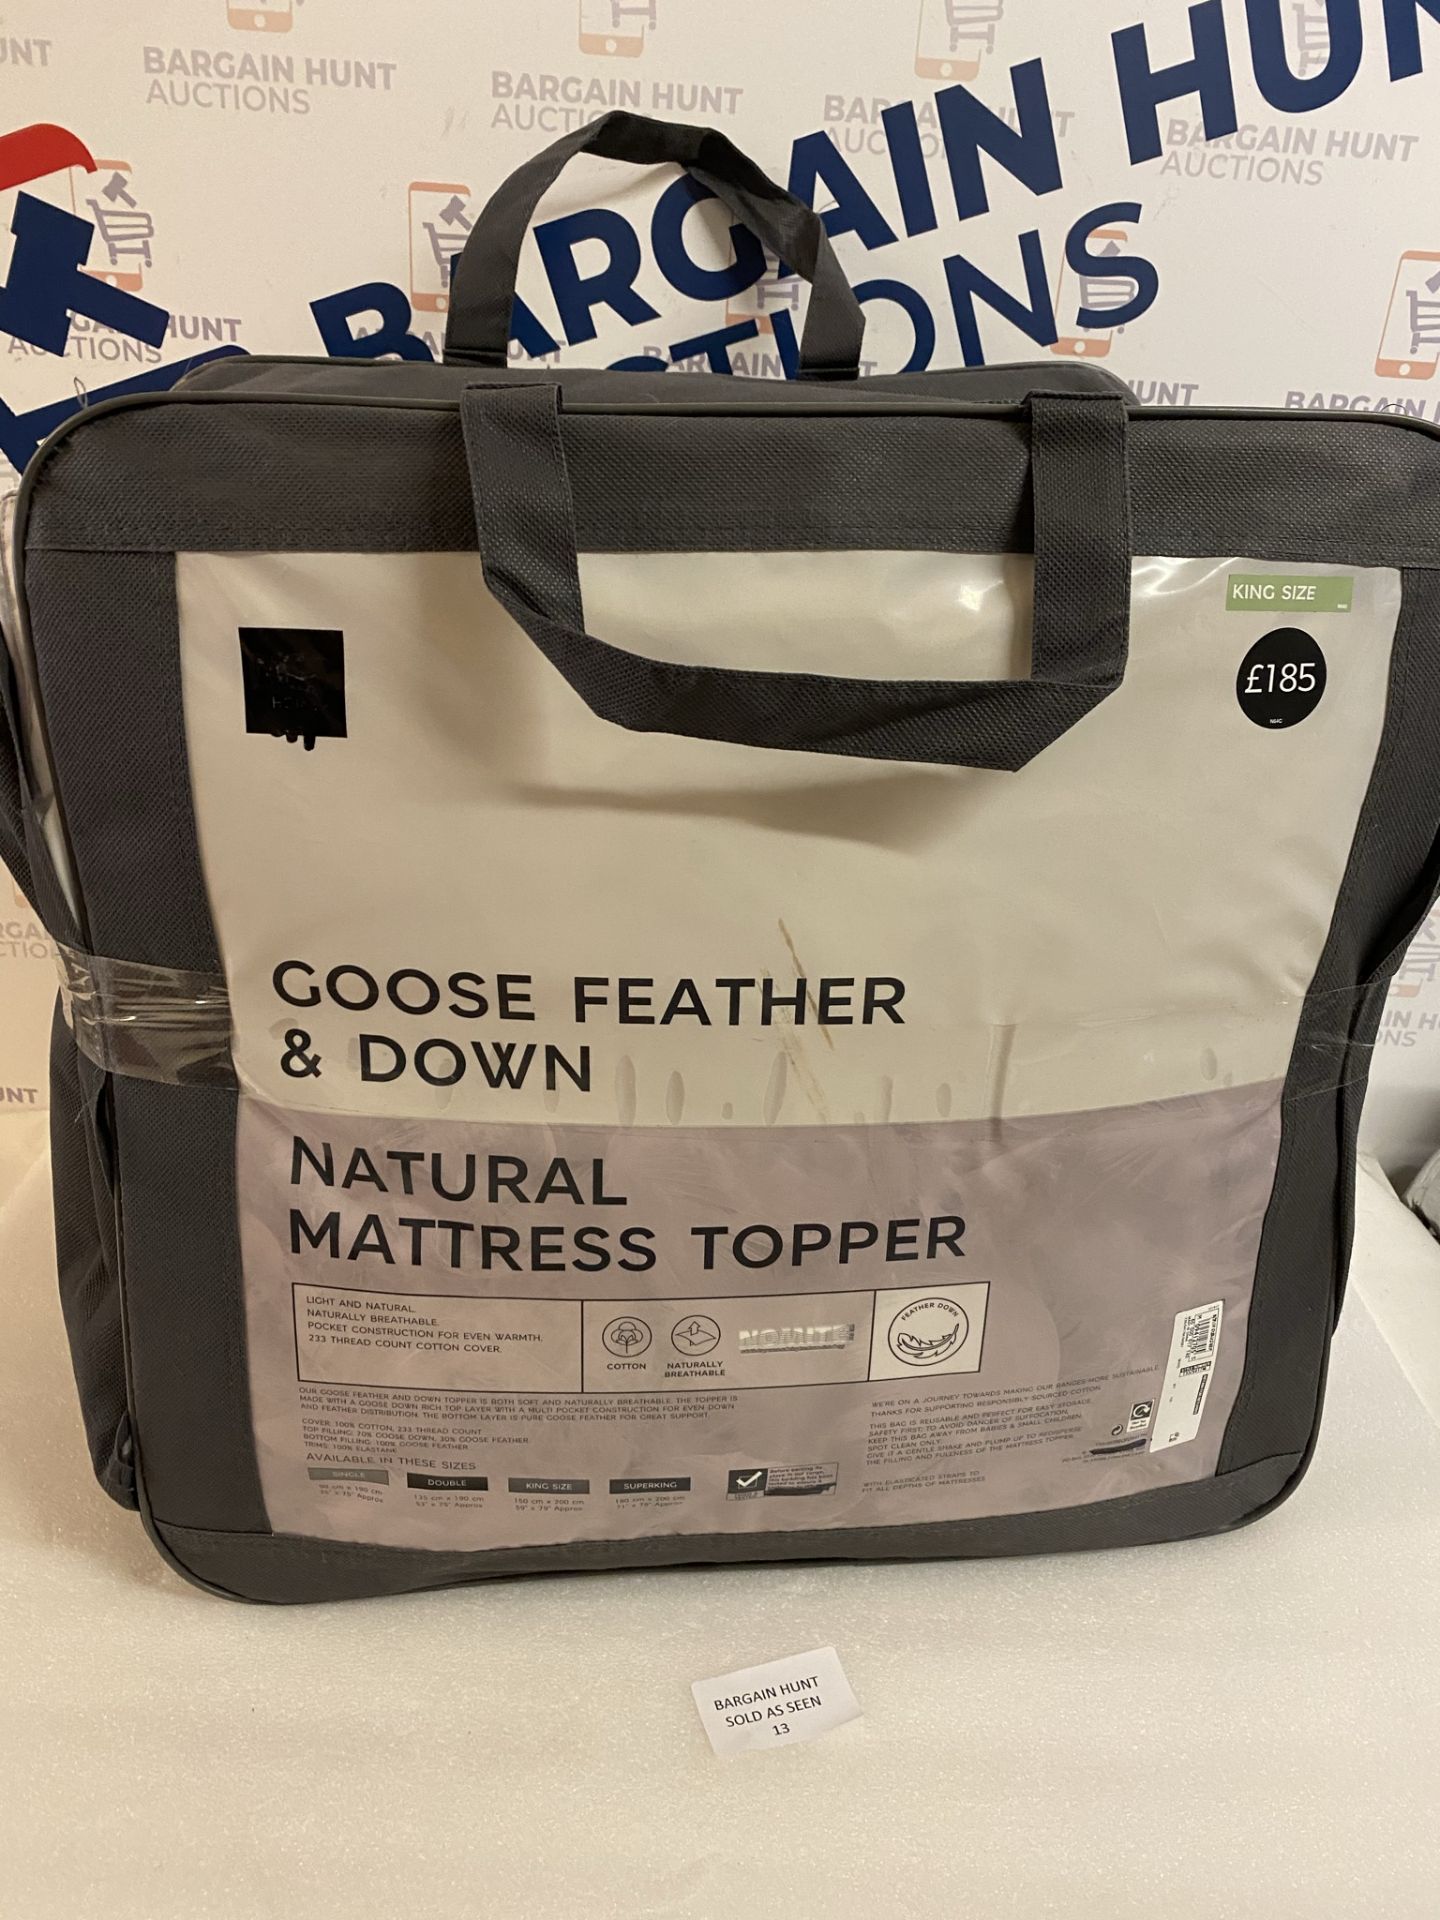 Goose Feather & Down Natural Mattress Topper, King Size RRP £185